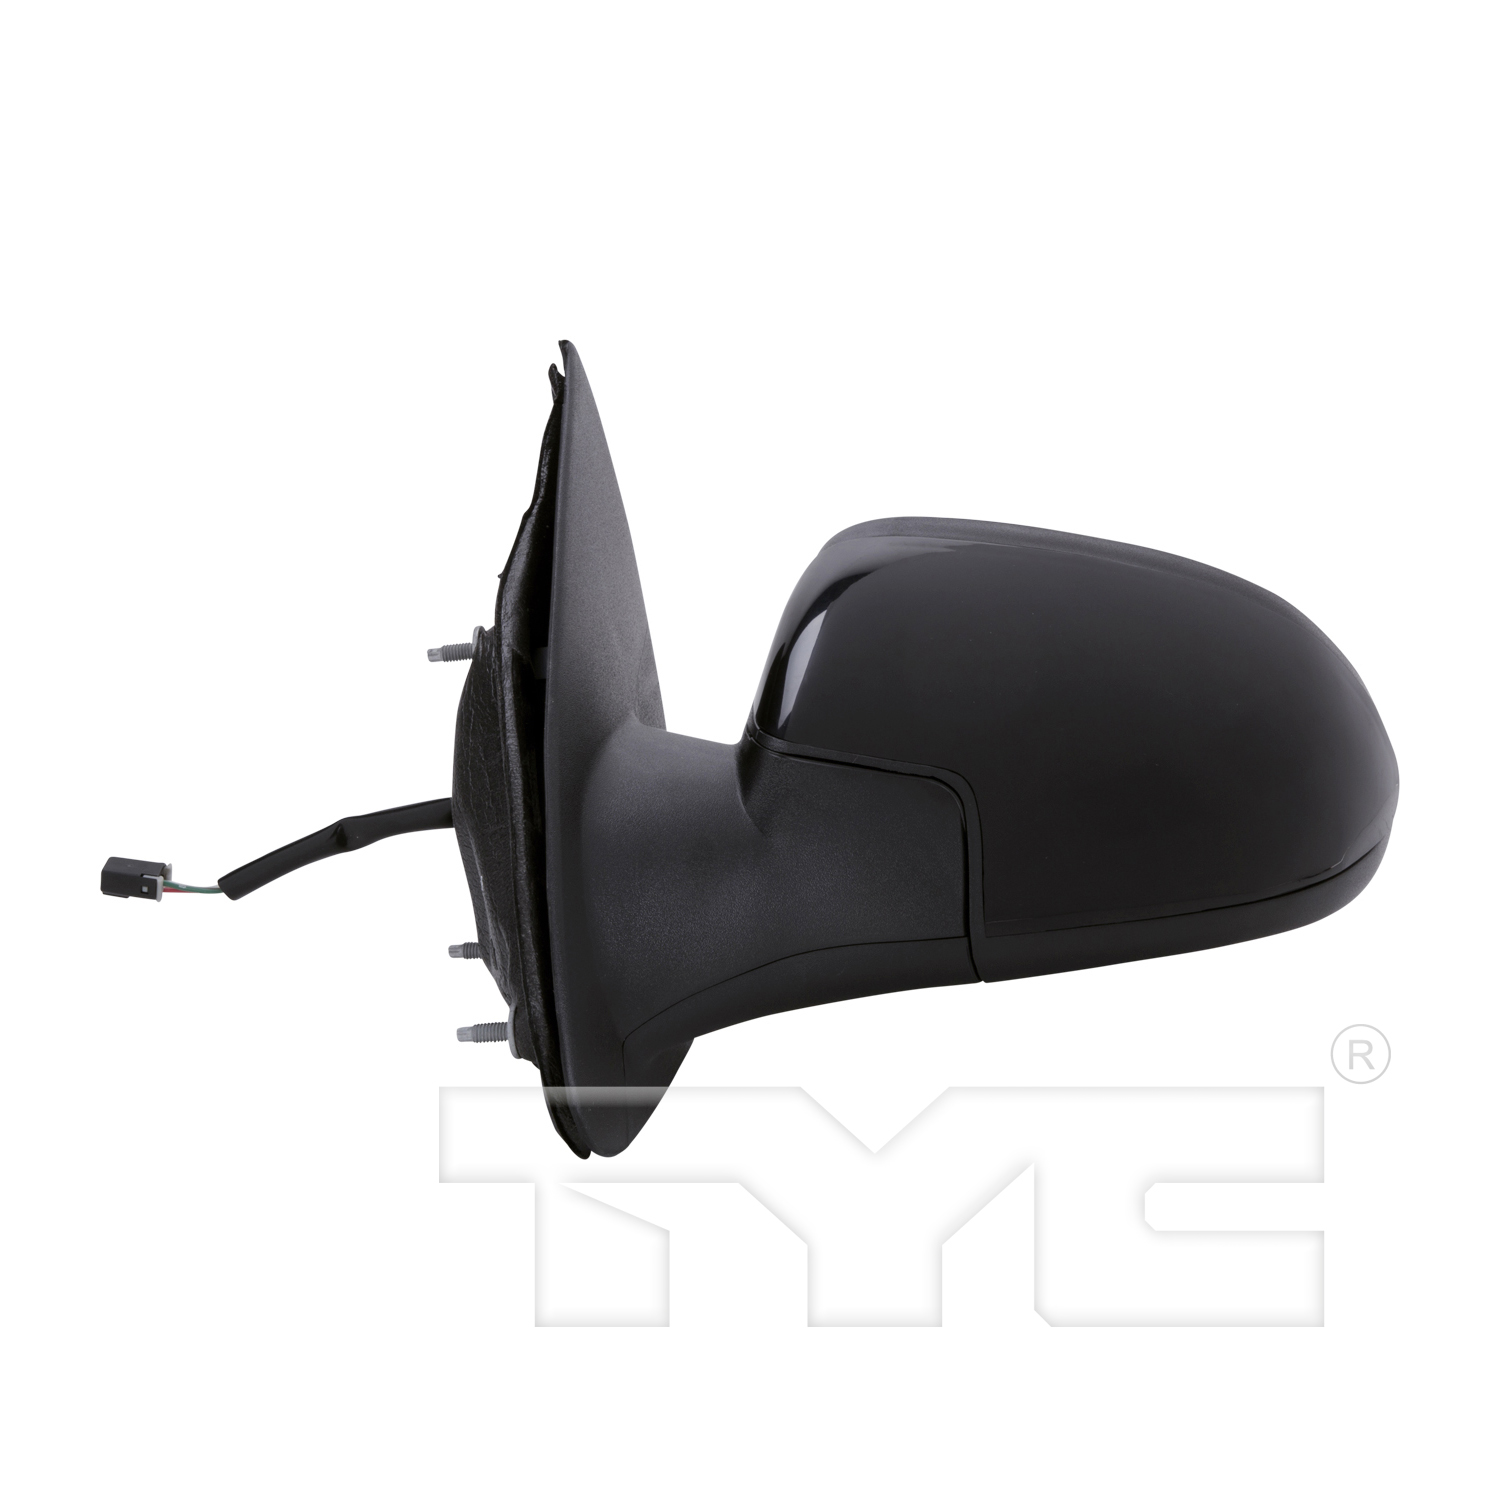 Aftermarket MIRRORS for CHEVROLET - COBALT, COBALT,05-10,LT Mirror outside rear view